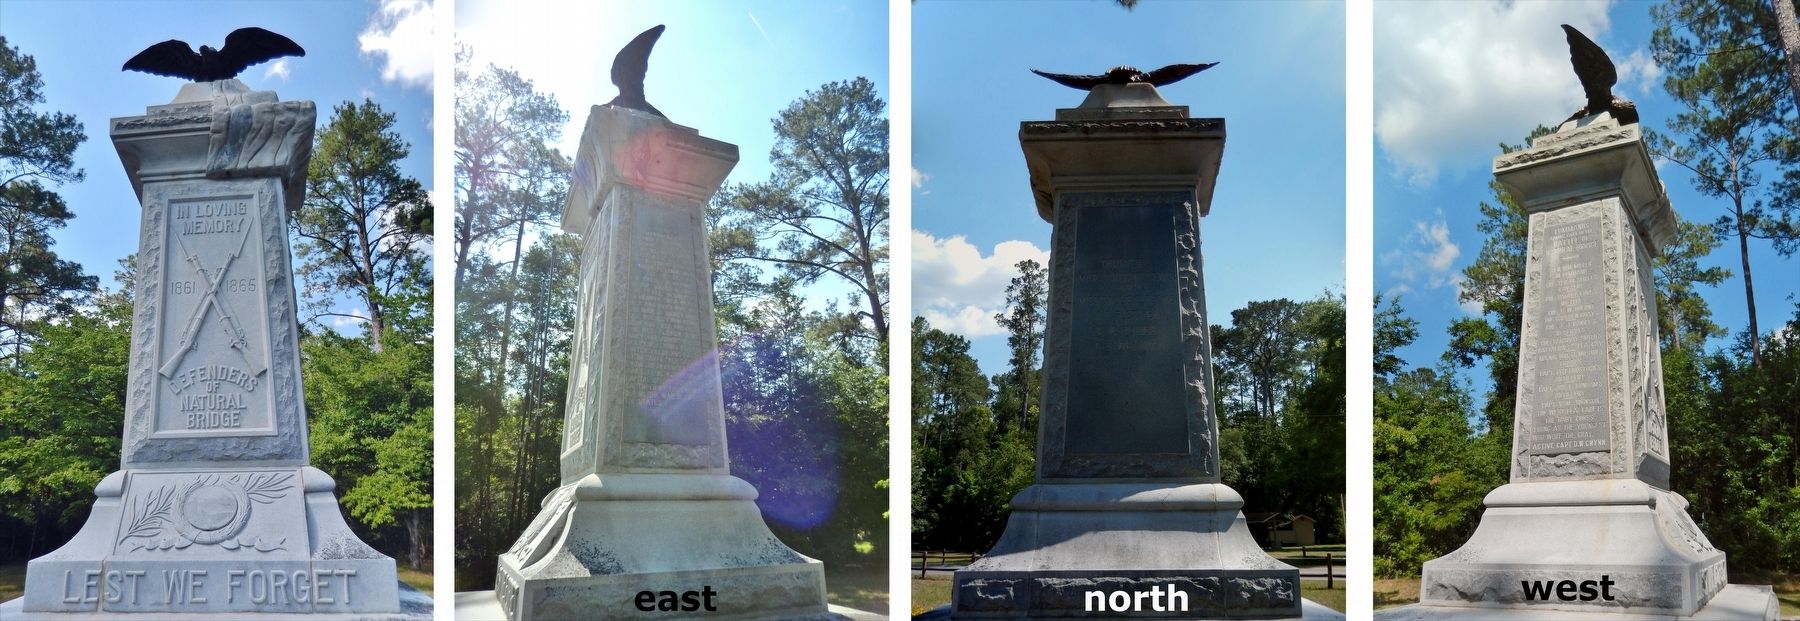 Confederate Monument image, Touch for more information